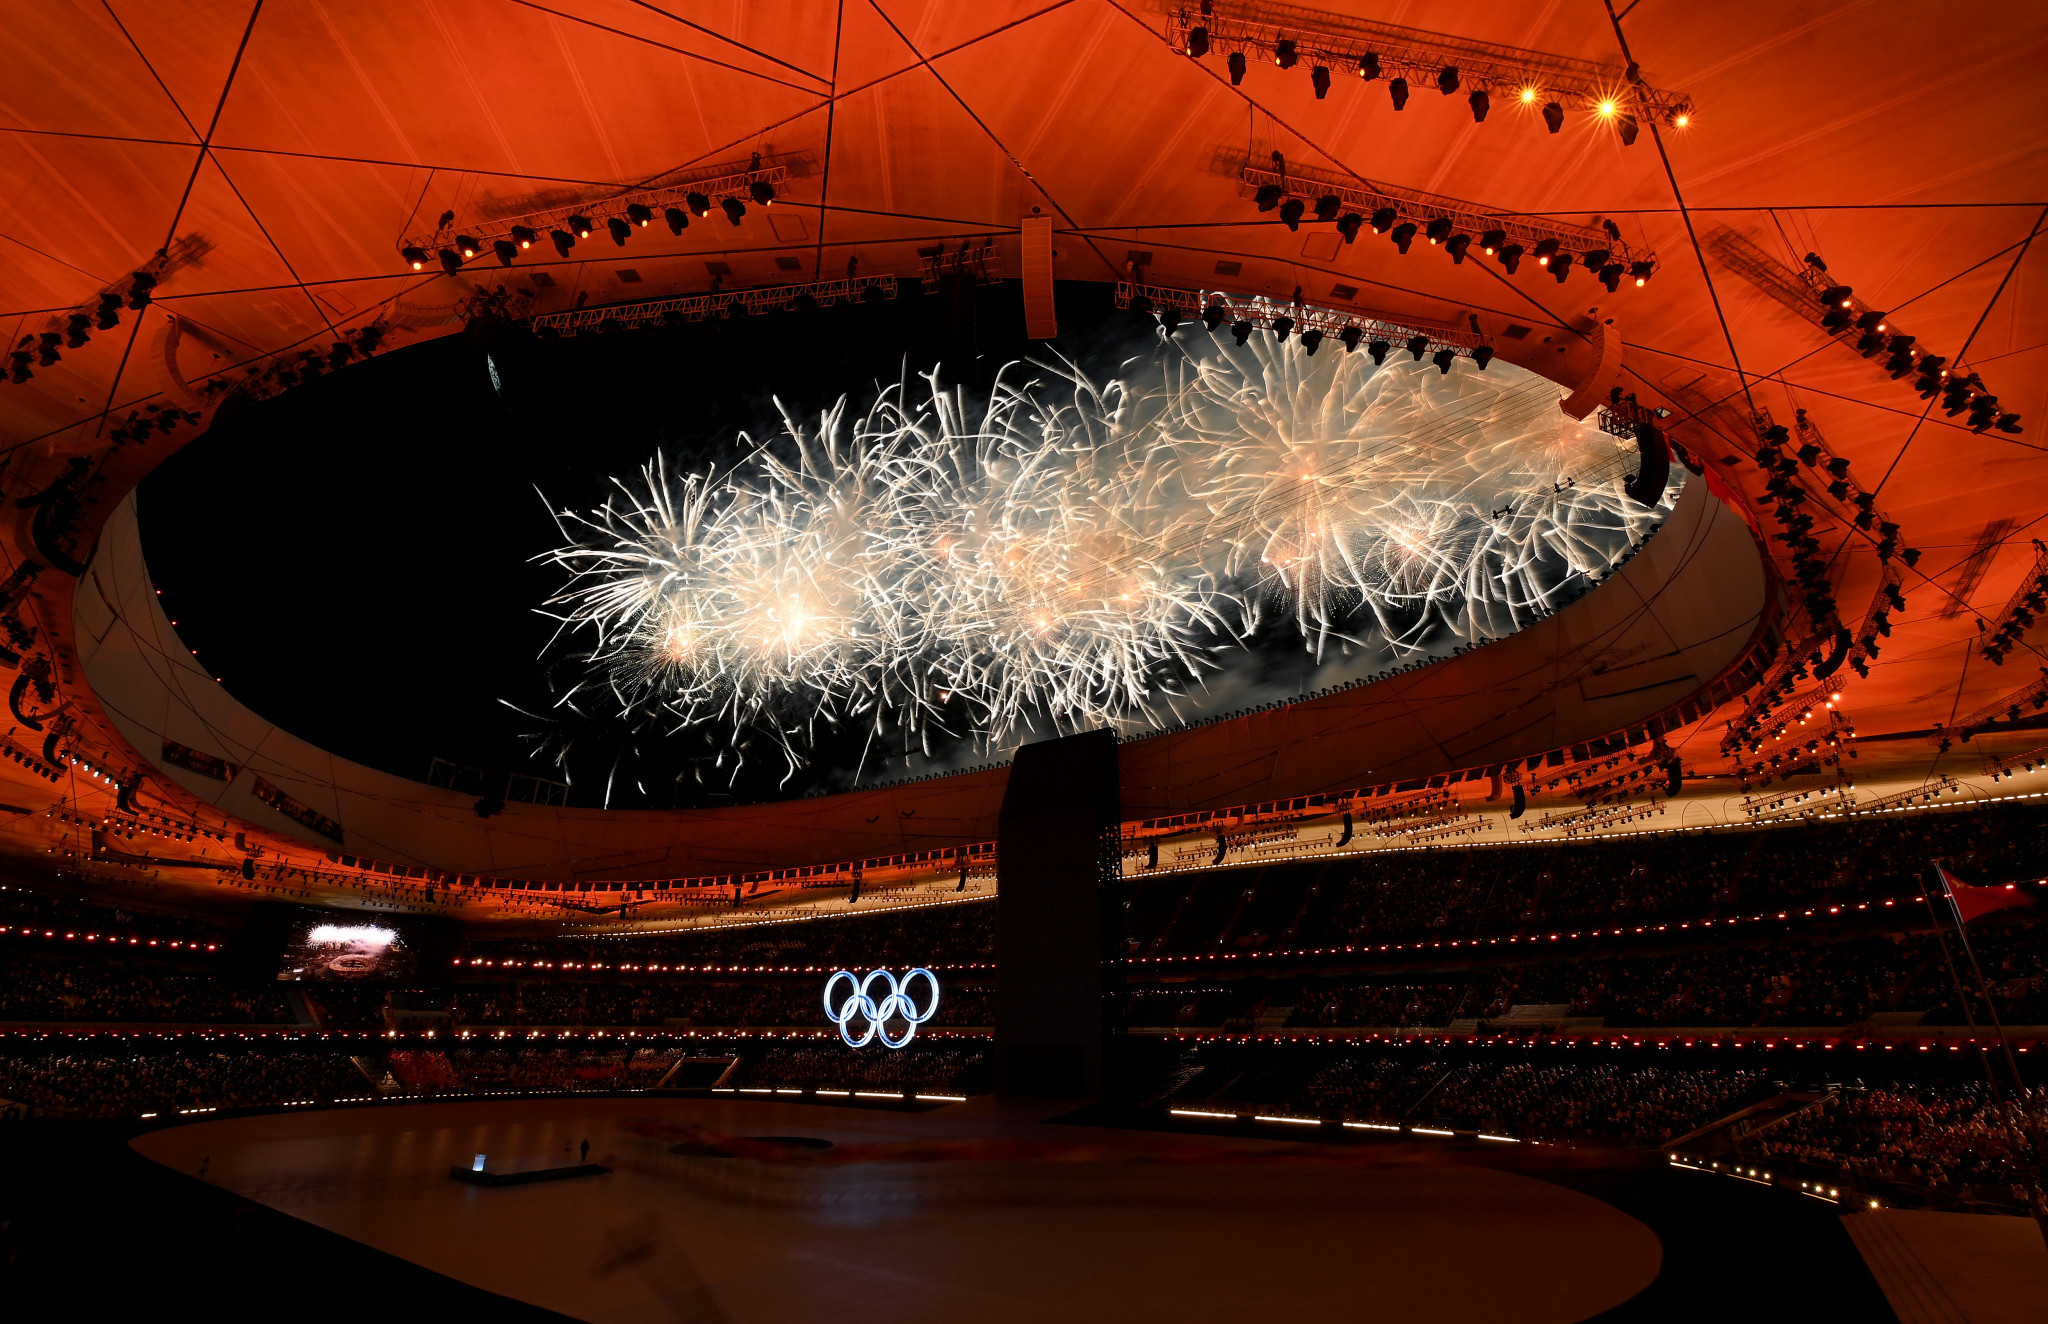 insidethegames is reporting LIVE from the Opening Ceremony of the Beijing 2022 Winter Olympics